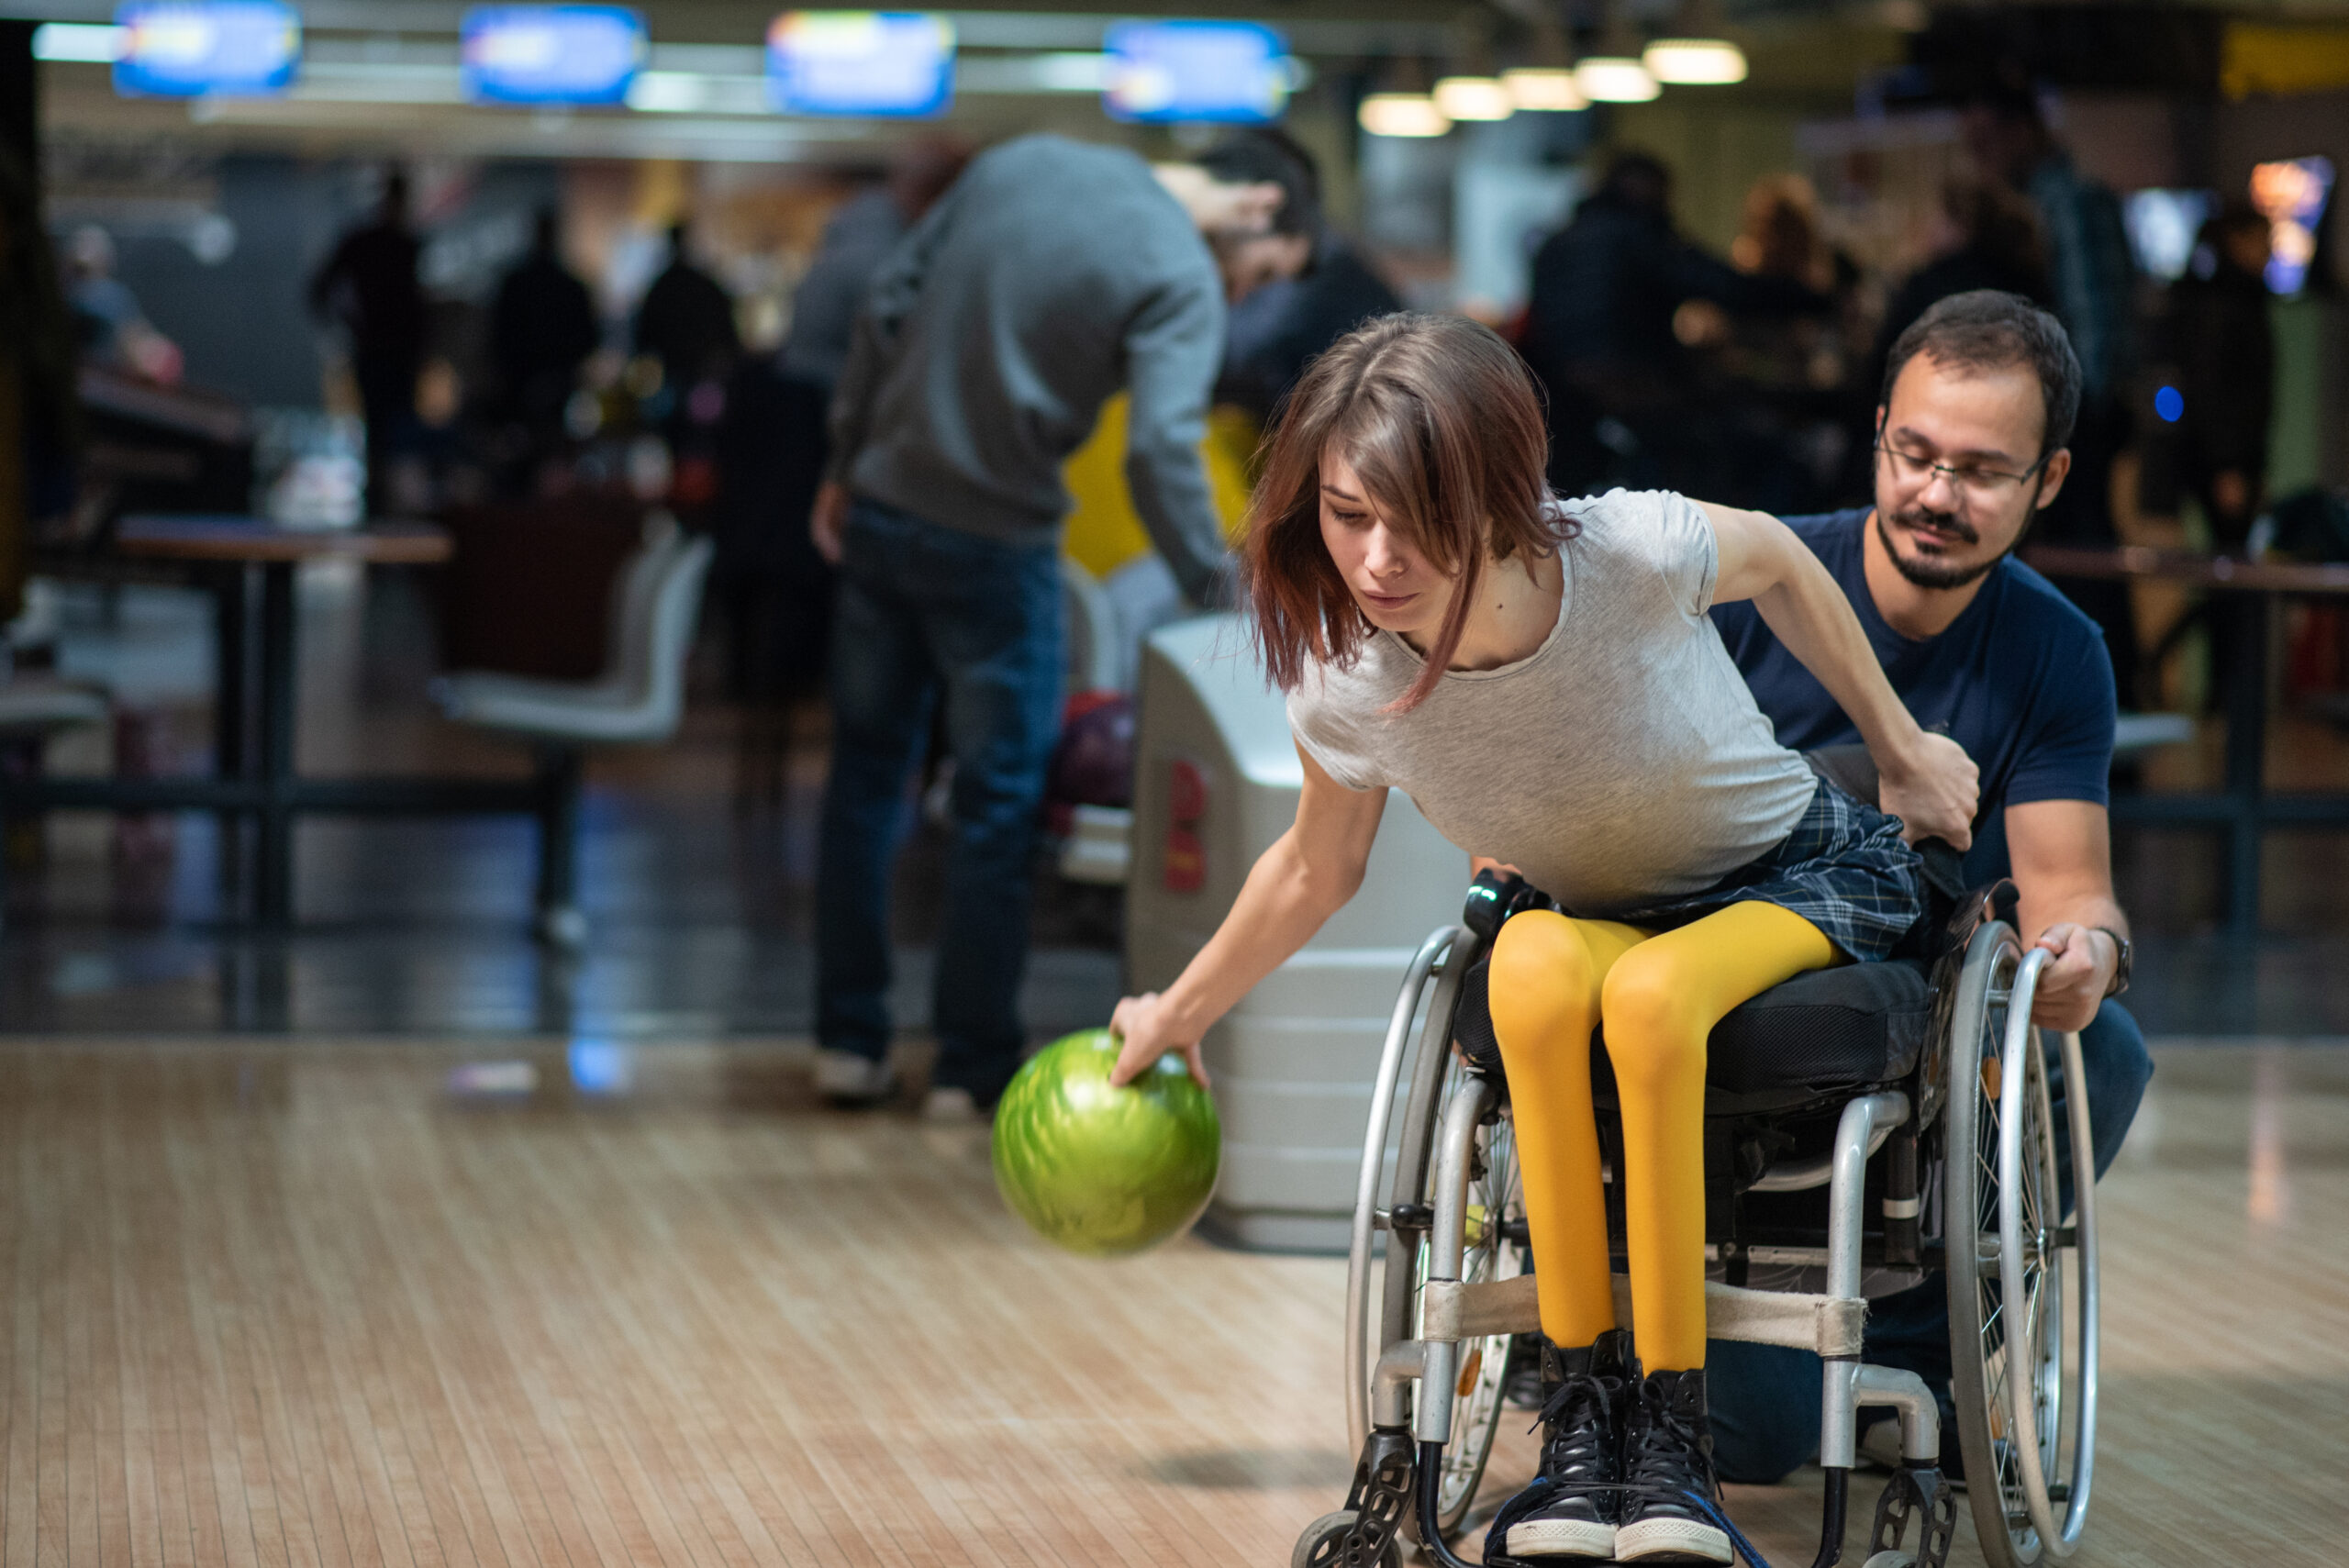 Recreation at a bowling lane, a female wheelchair users holds a green ball ready to roll